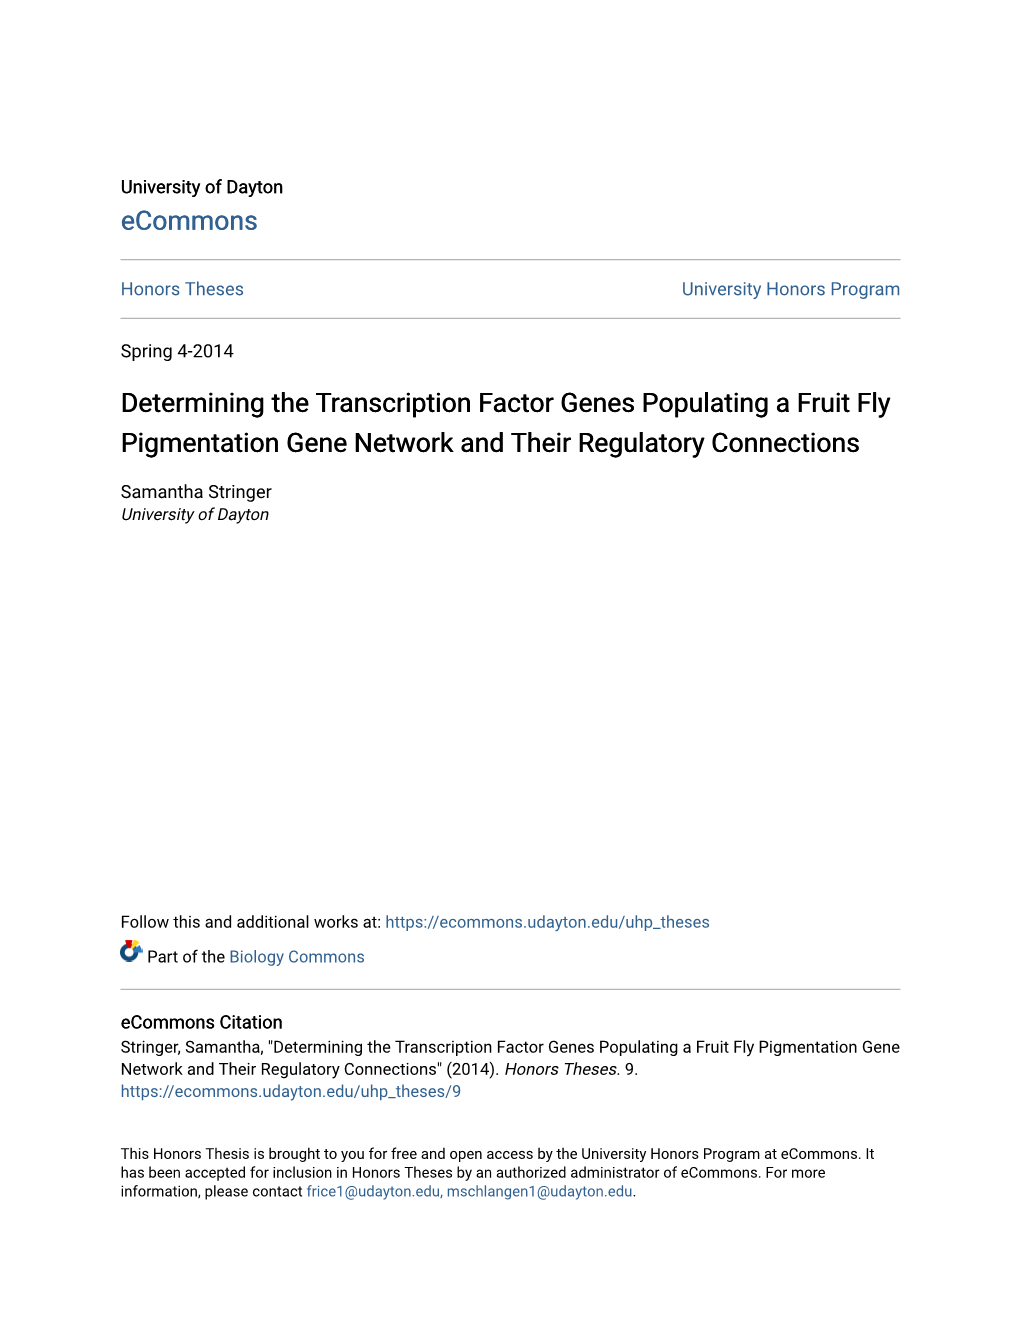 Determining the Transcription Factor Genes Populating a Fruit Fly Pigmentation Gene Network and Their Regulatory Connections